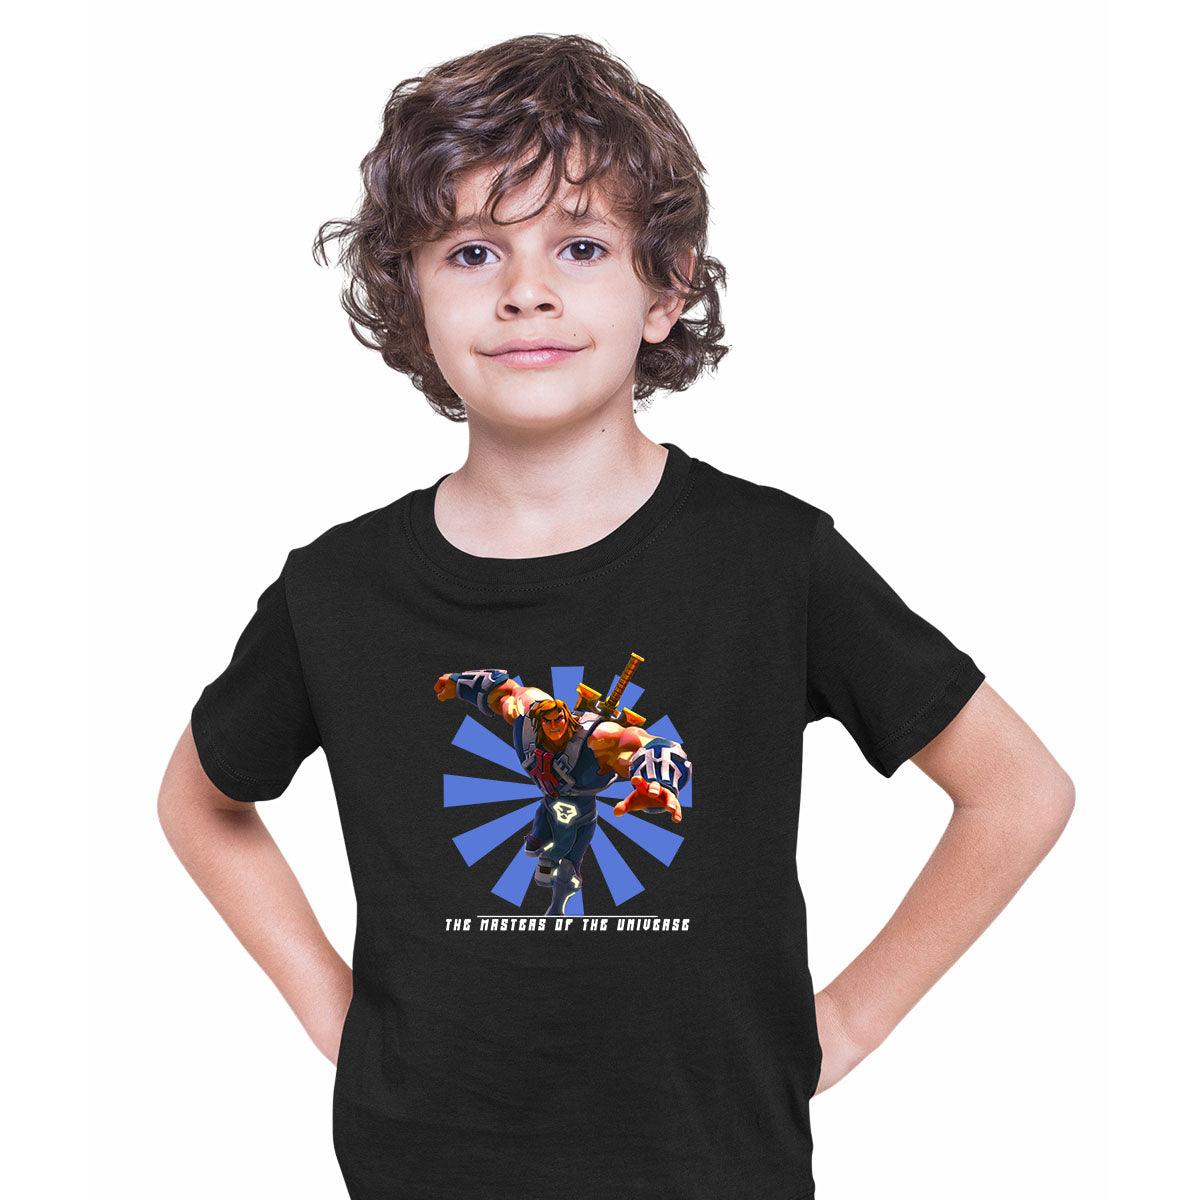 He-Man & The masters of the Universe Netflix Movie Typography T-shirt for Kids - Kuzi Tees